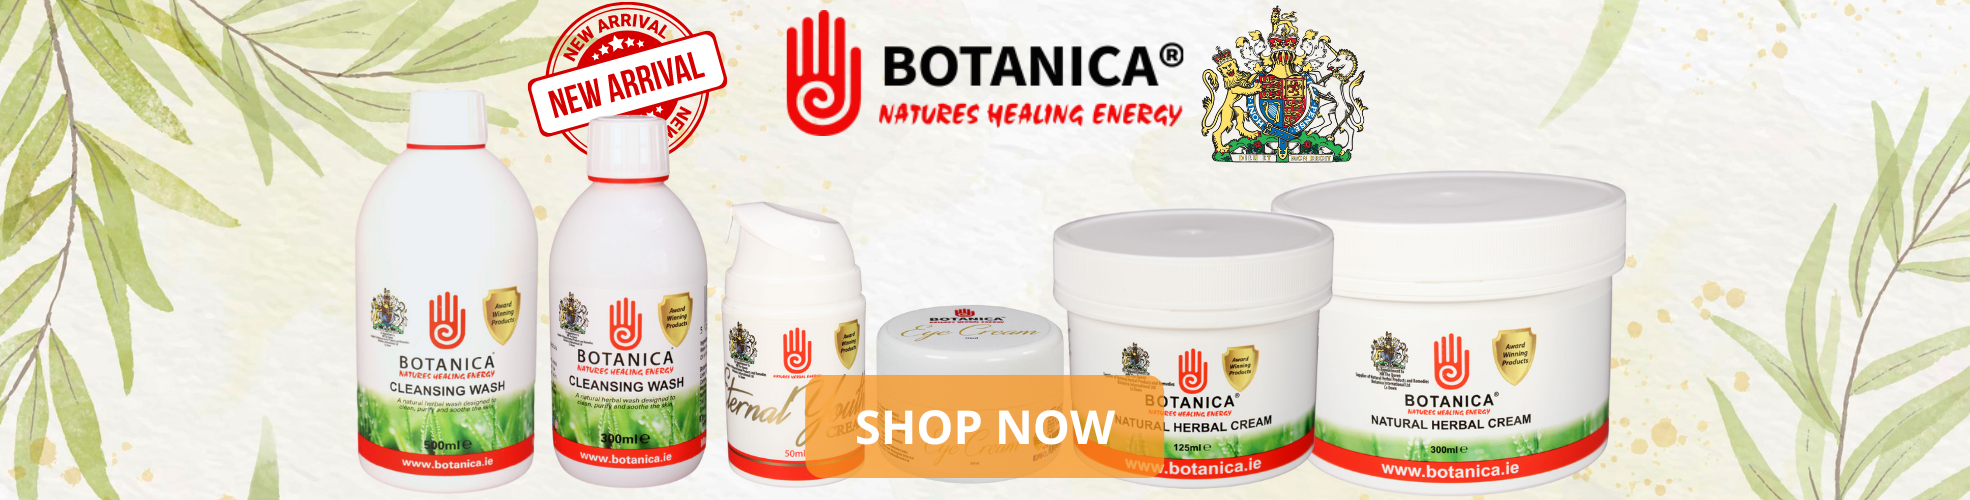 Shop wholesale Botanica Herbal Cream and Skincare Products at eapollo. 